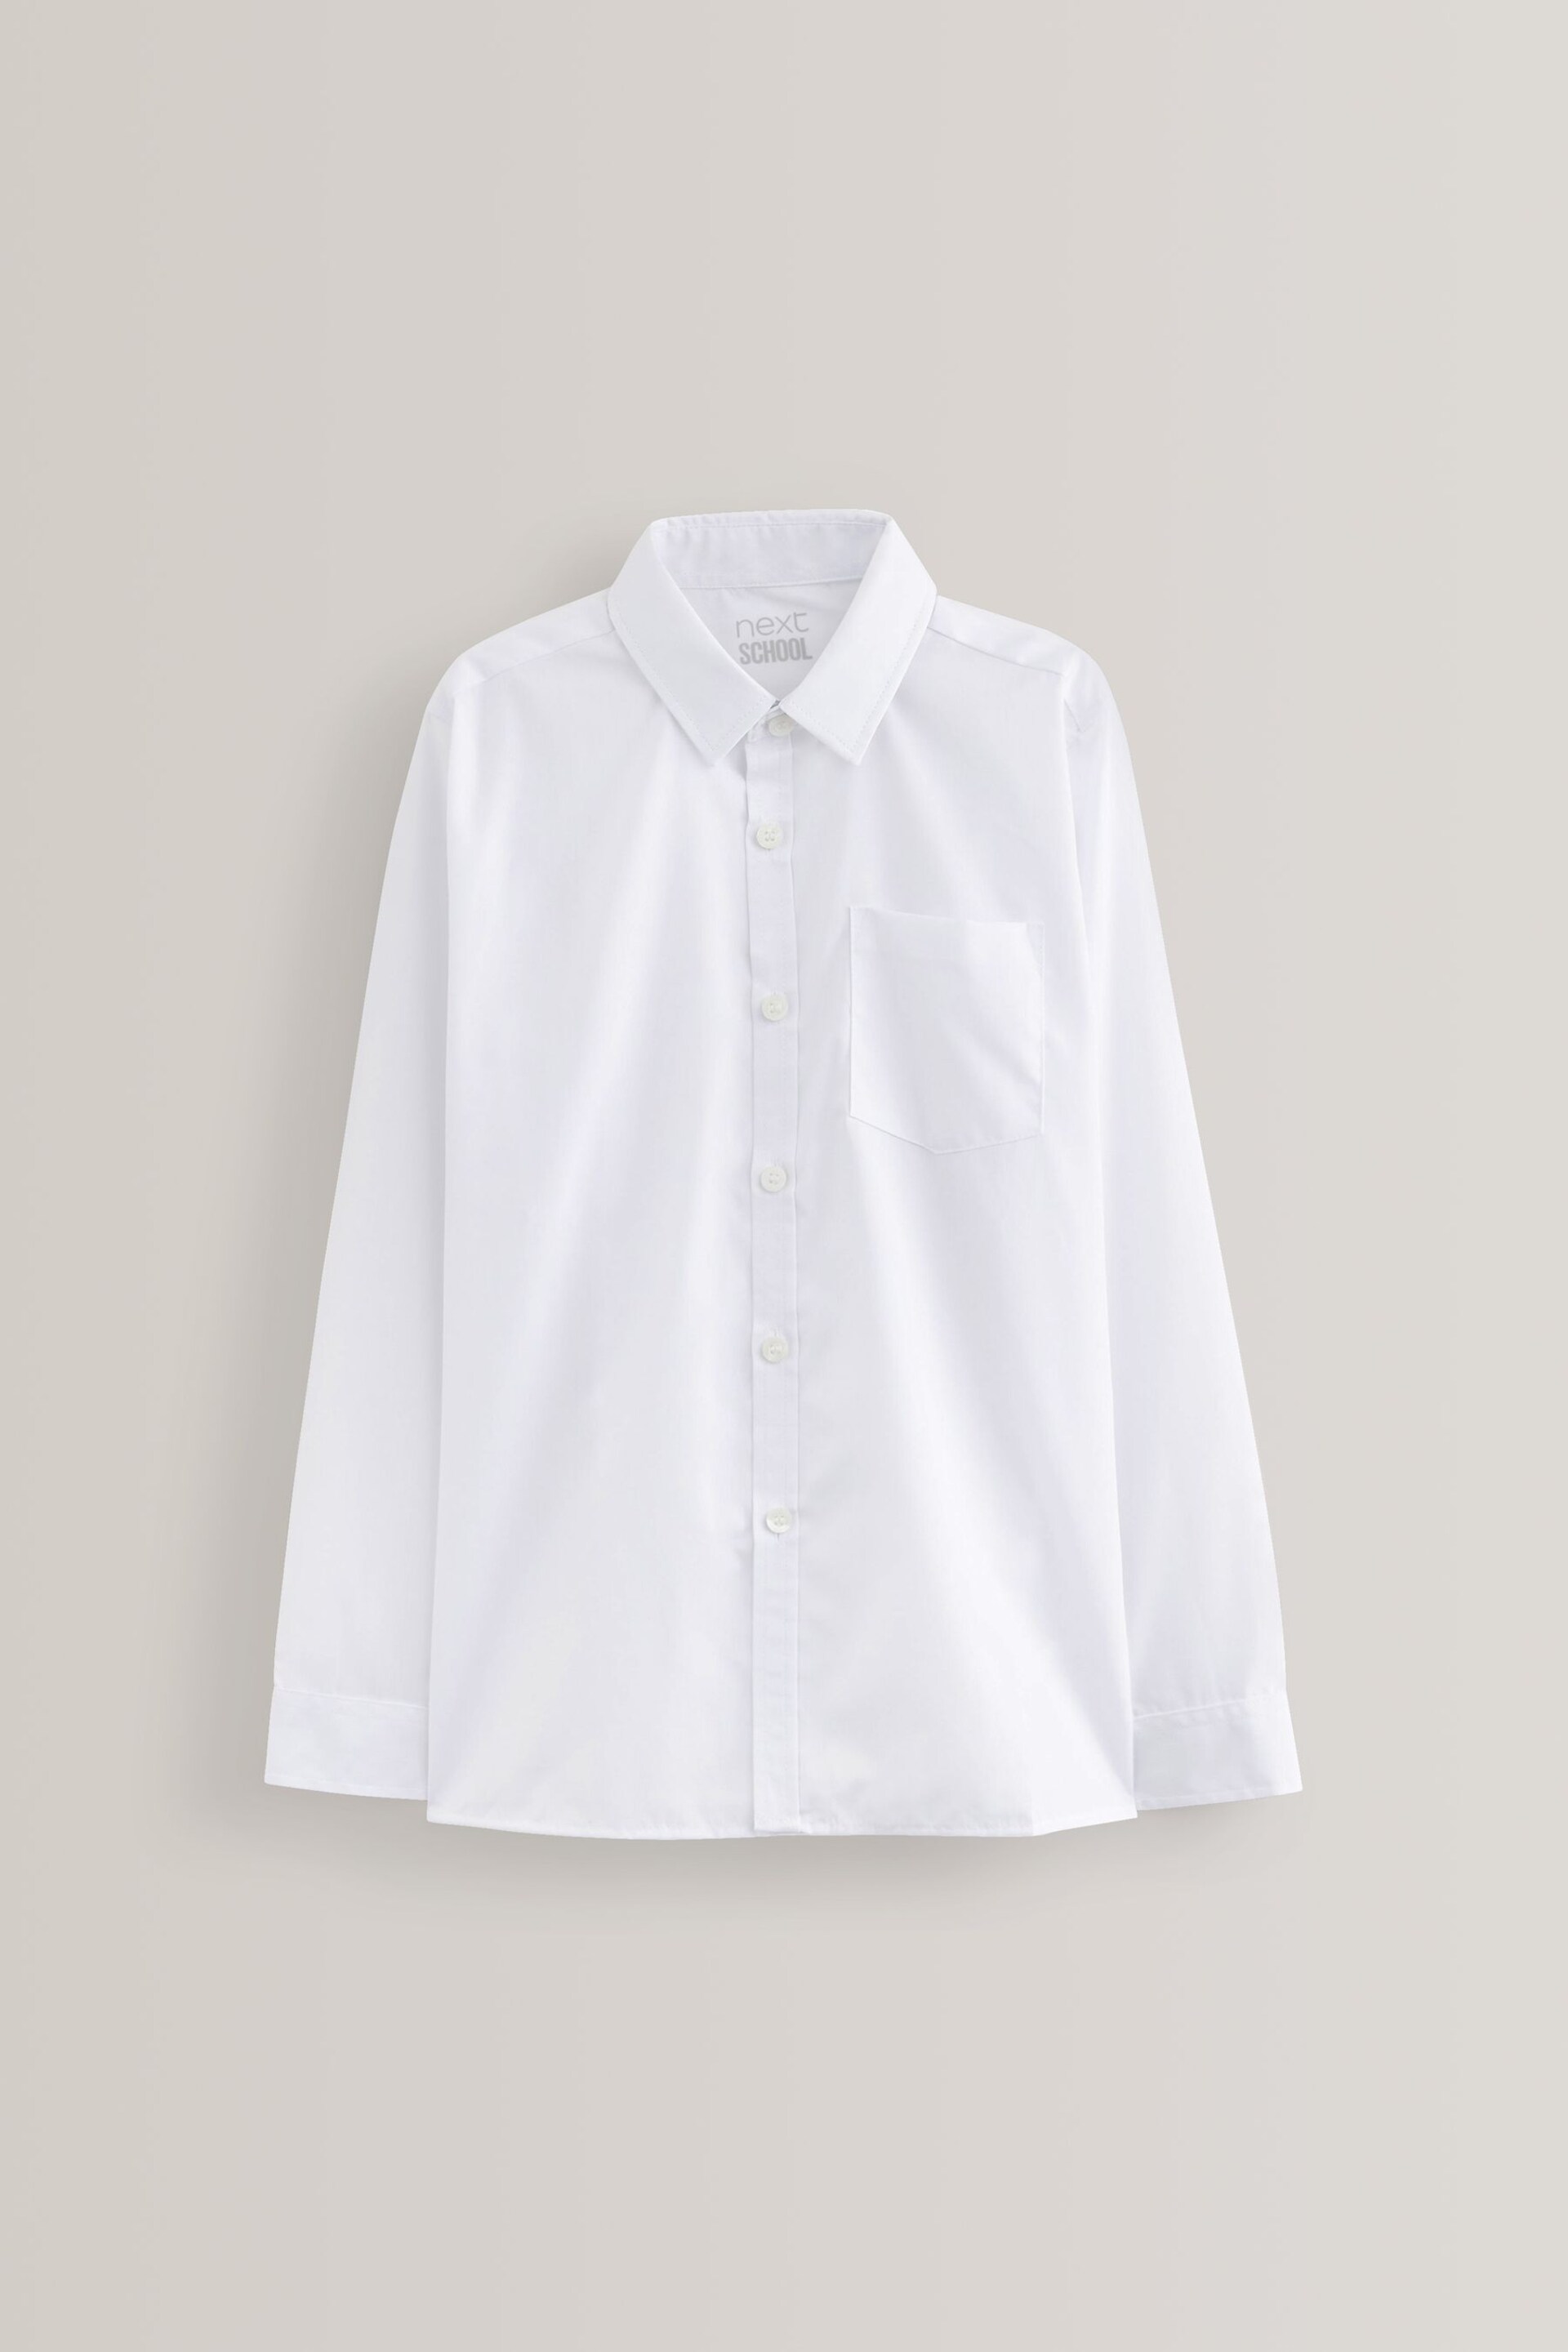 White Easy Fastening Long Sleeve School Shirts 2 Pack (3-12yrs) - Image 3 of 4